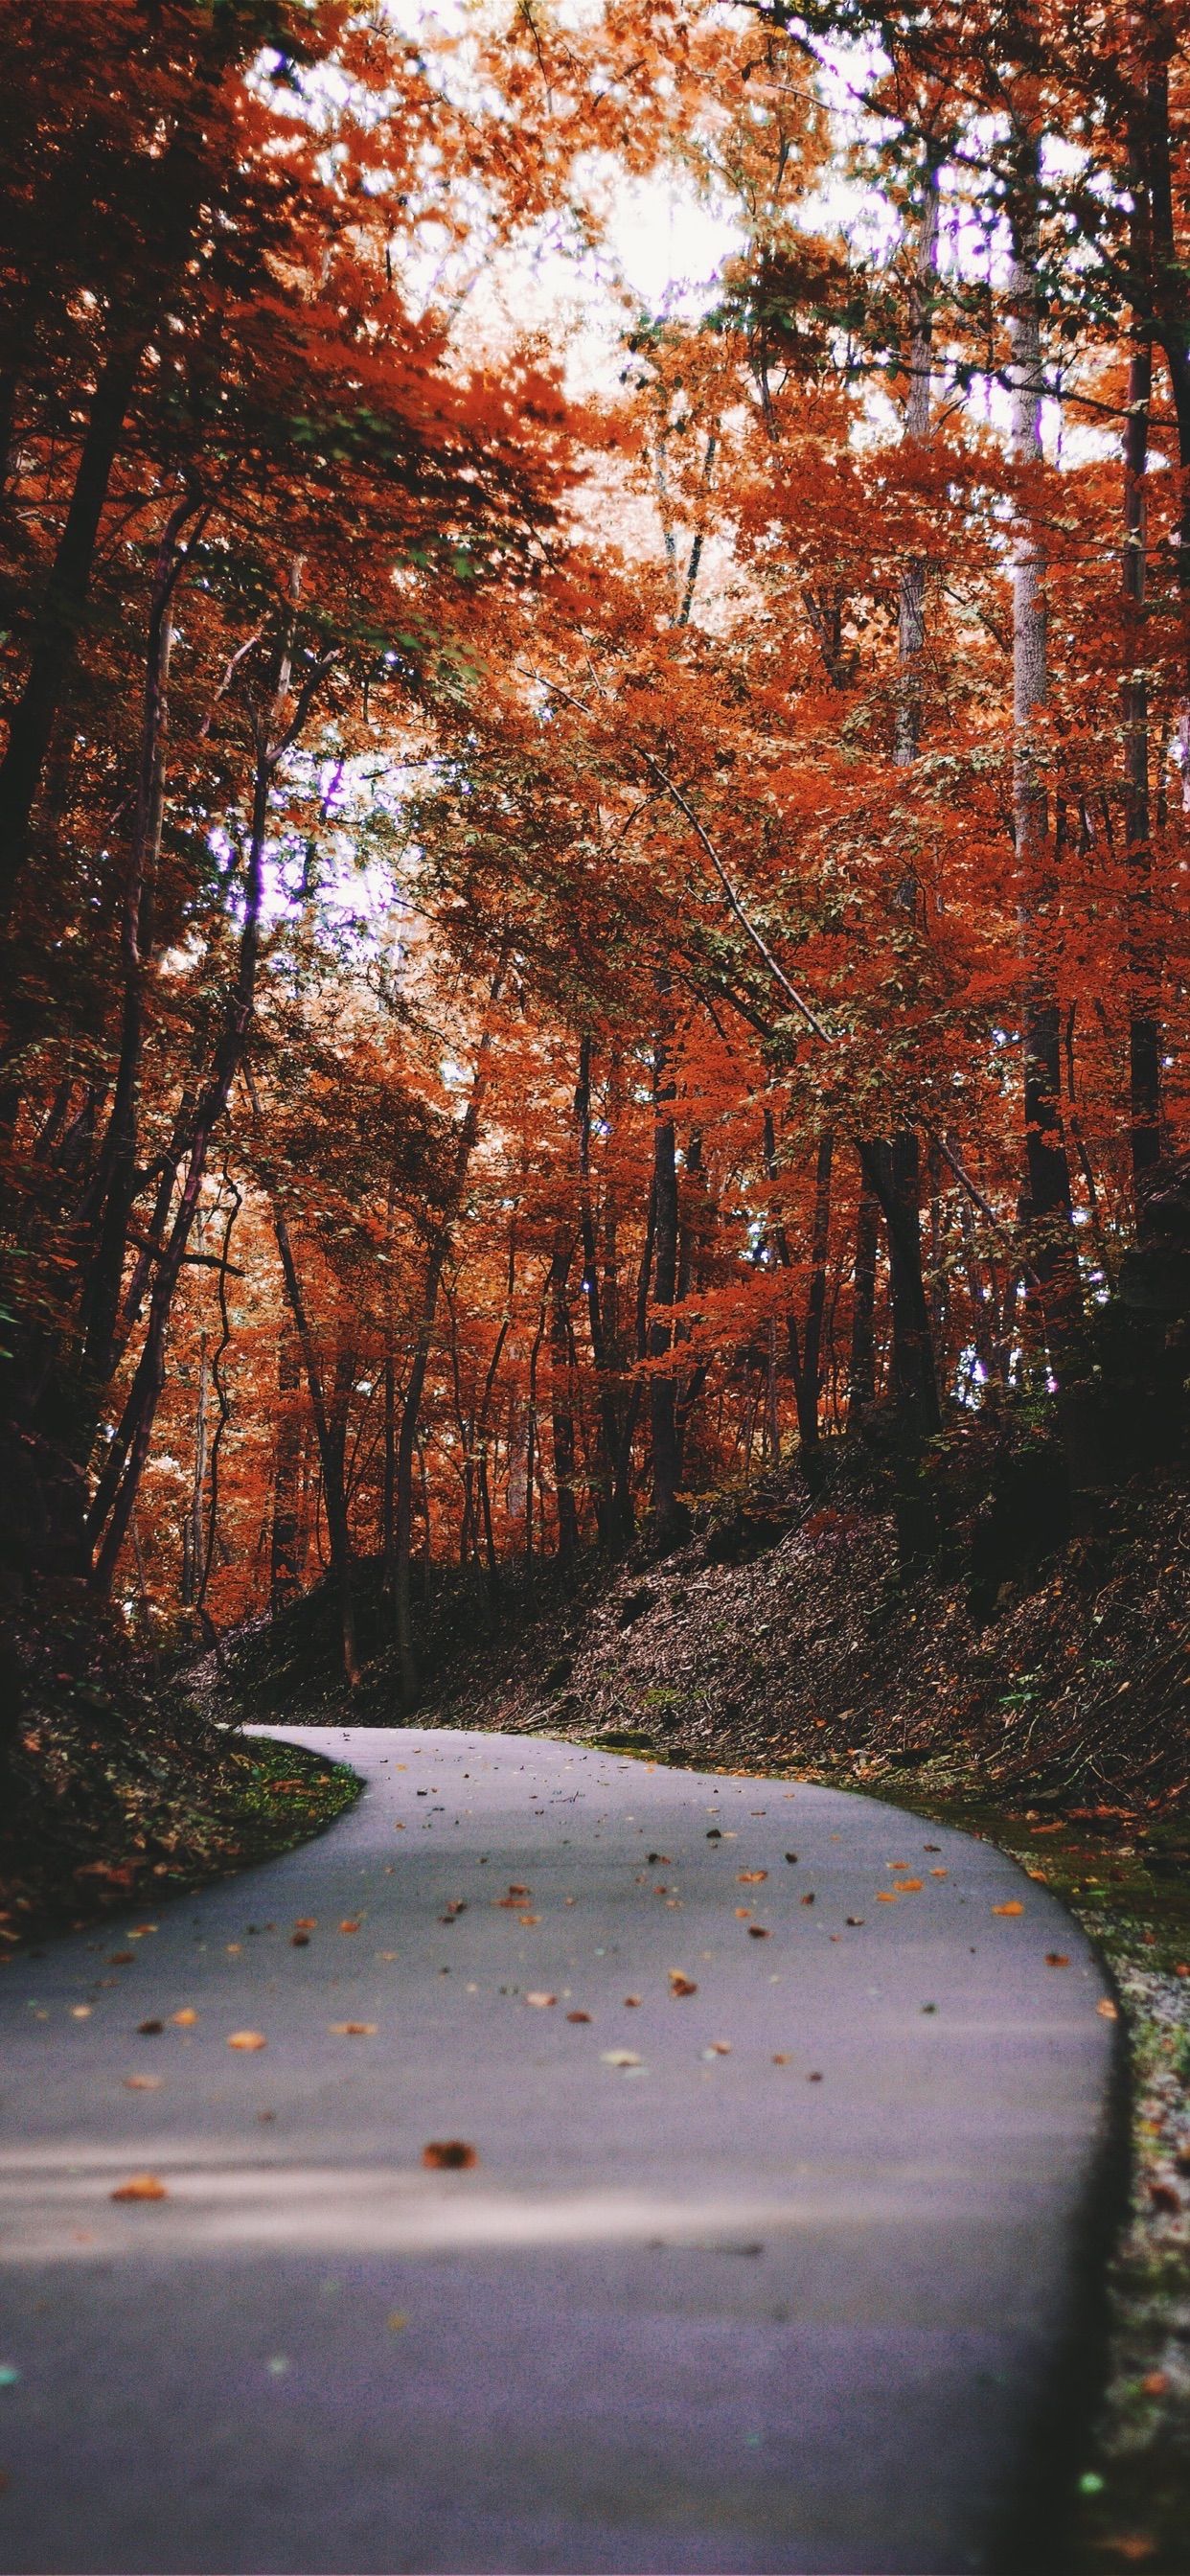 Iphone Xr Wallpapers Autumn